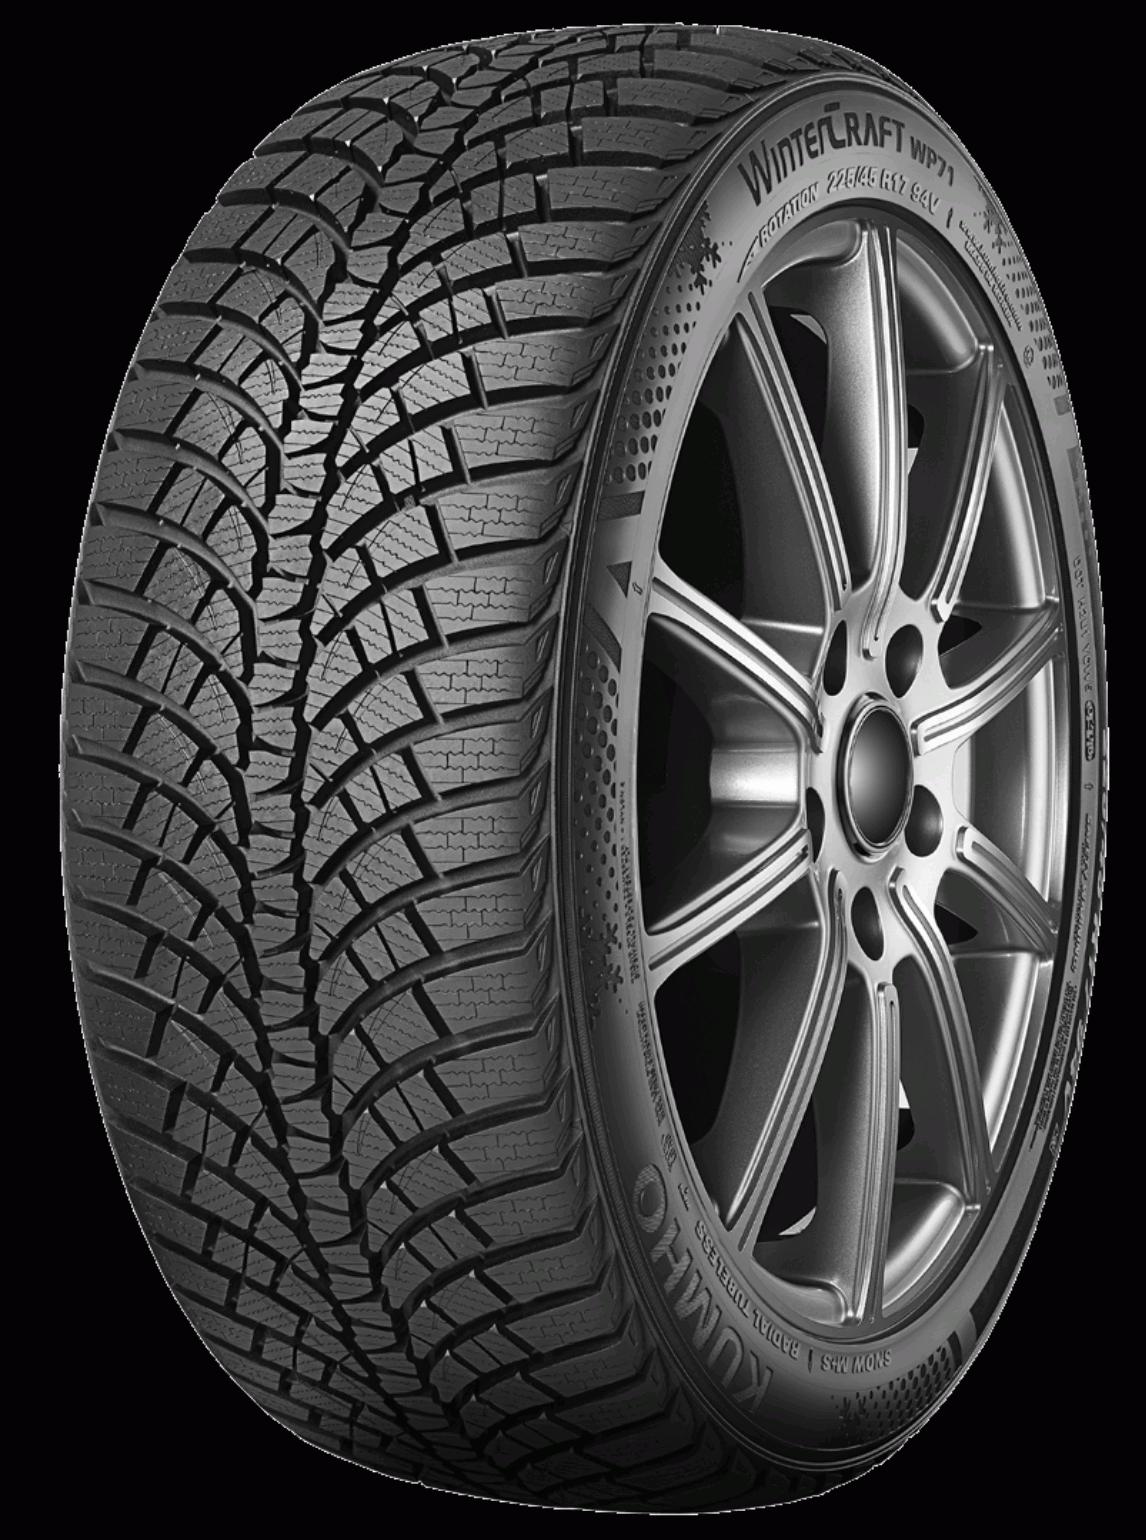 Kumho WinterCraft WS71 - Tire Reviews and Tests